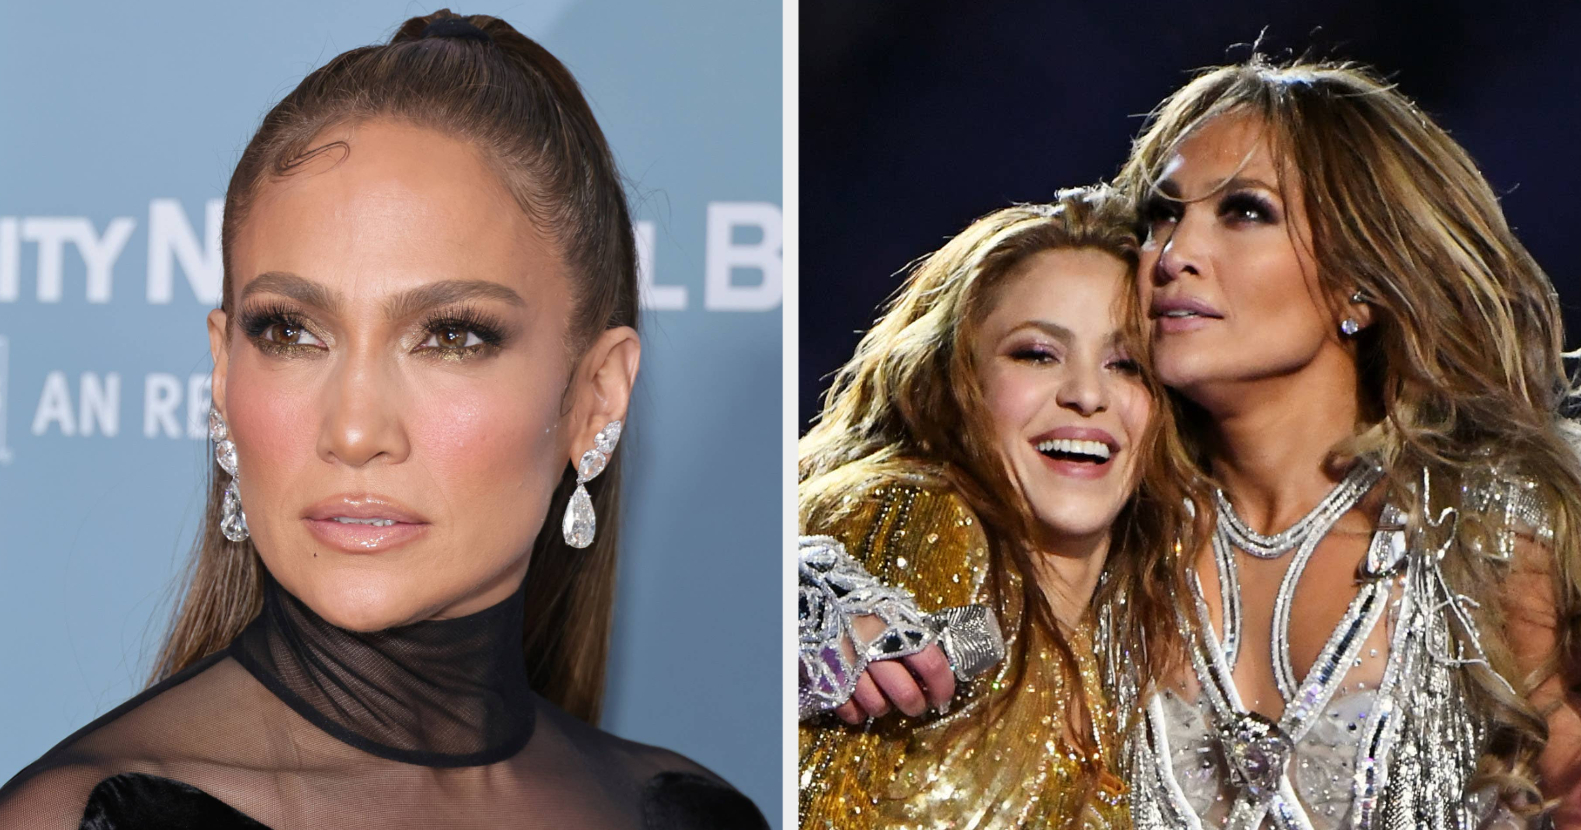 JLo Calls Super Bowl Halftime Show with Shakira 'Worst Idea in the World'